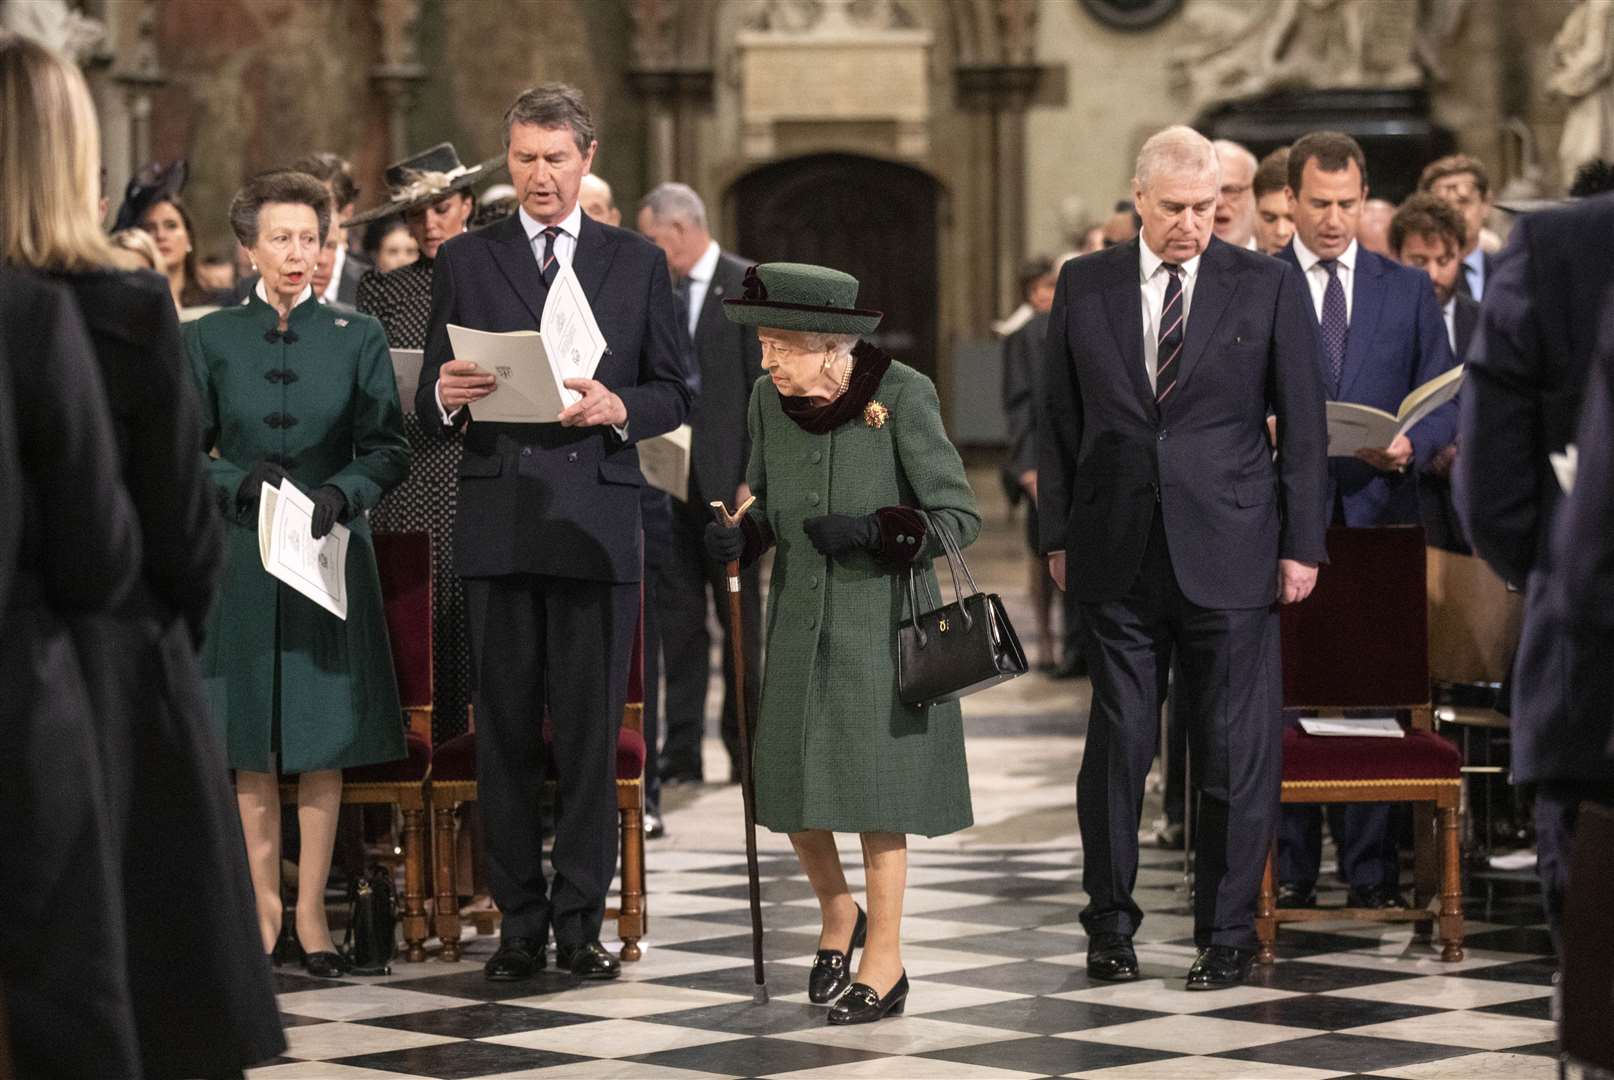 The Queen at the Abbey on Tuesday (Richard Pohle/The Times/PA)